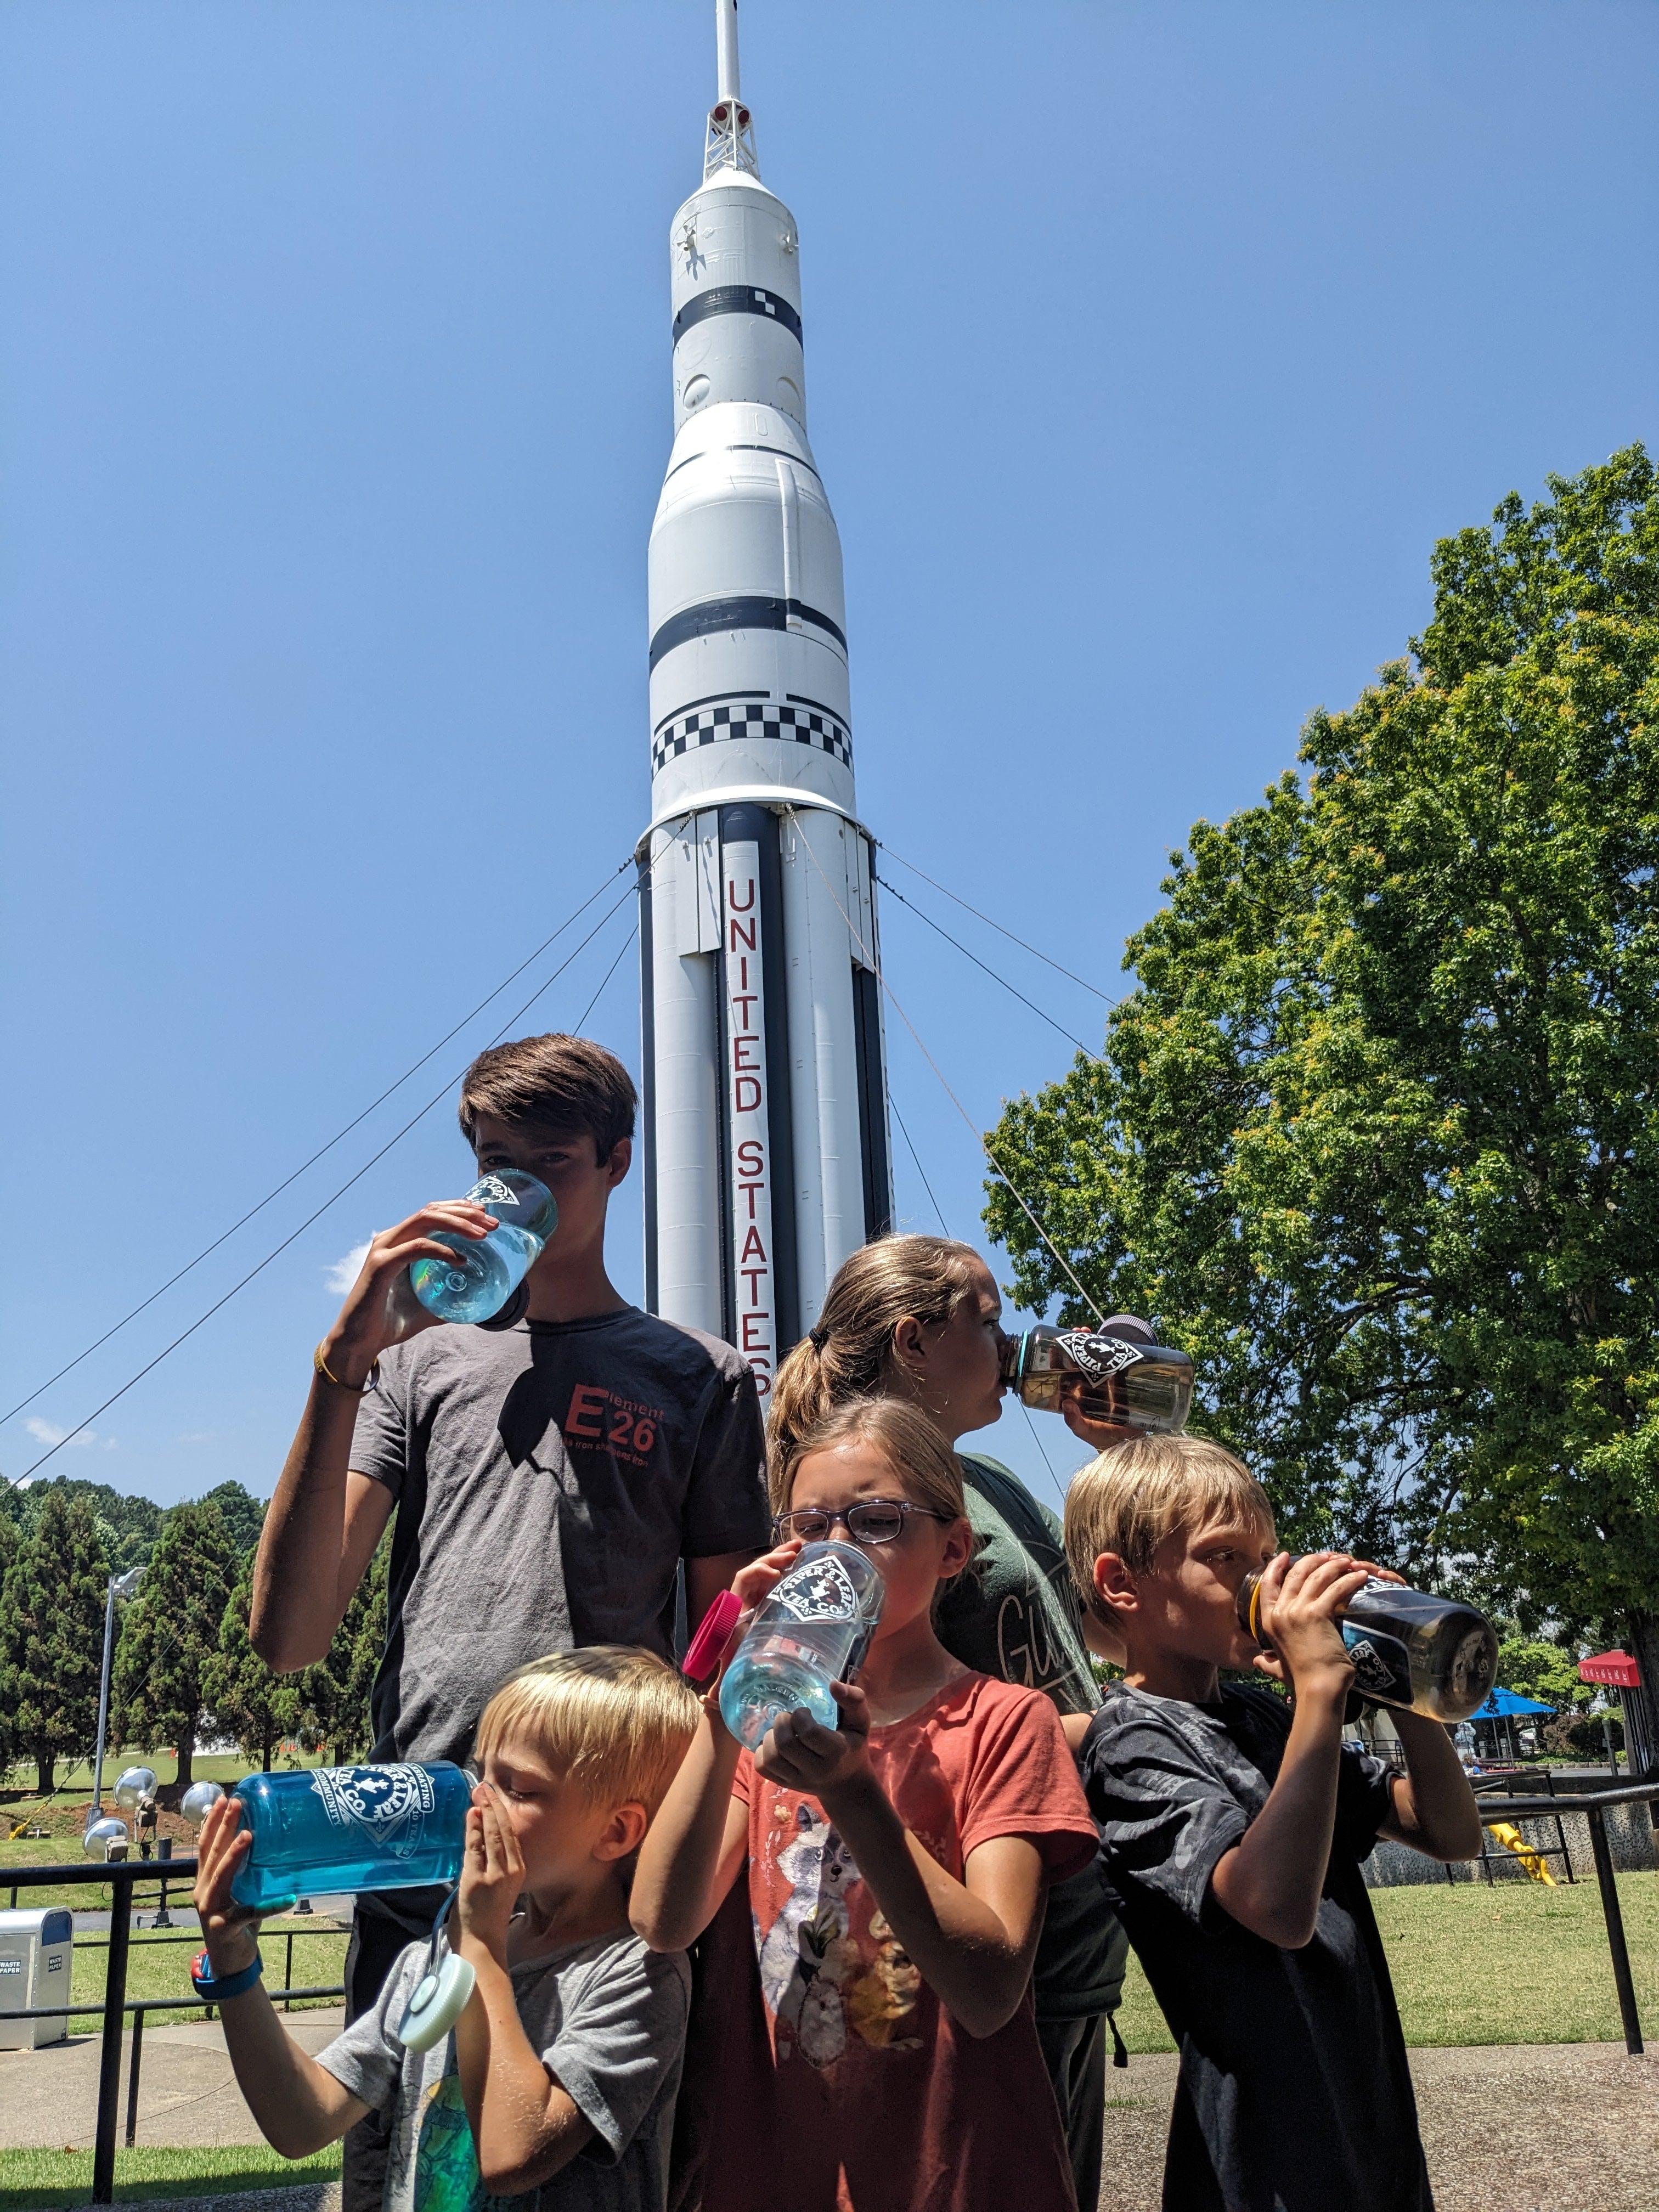 5 of the Christopher kids, drinking water out of their nalgenes in front of Huntsville's very own Saturn V, at the United States Space and Rocket Center